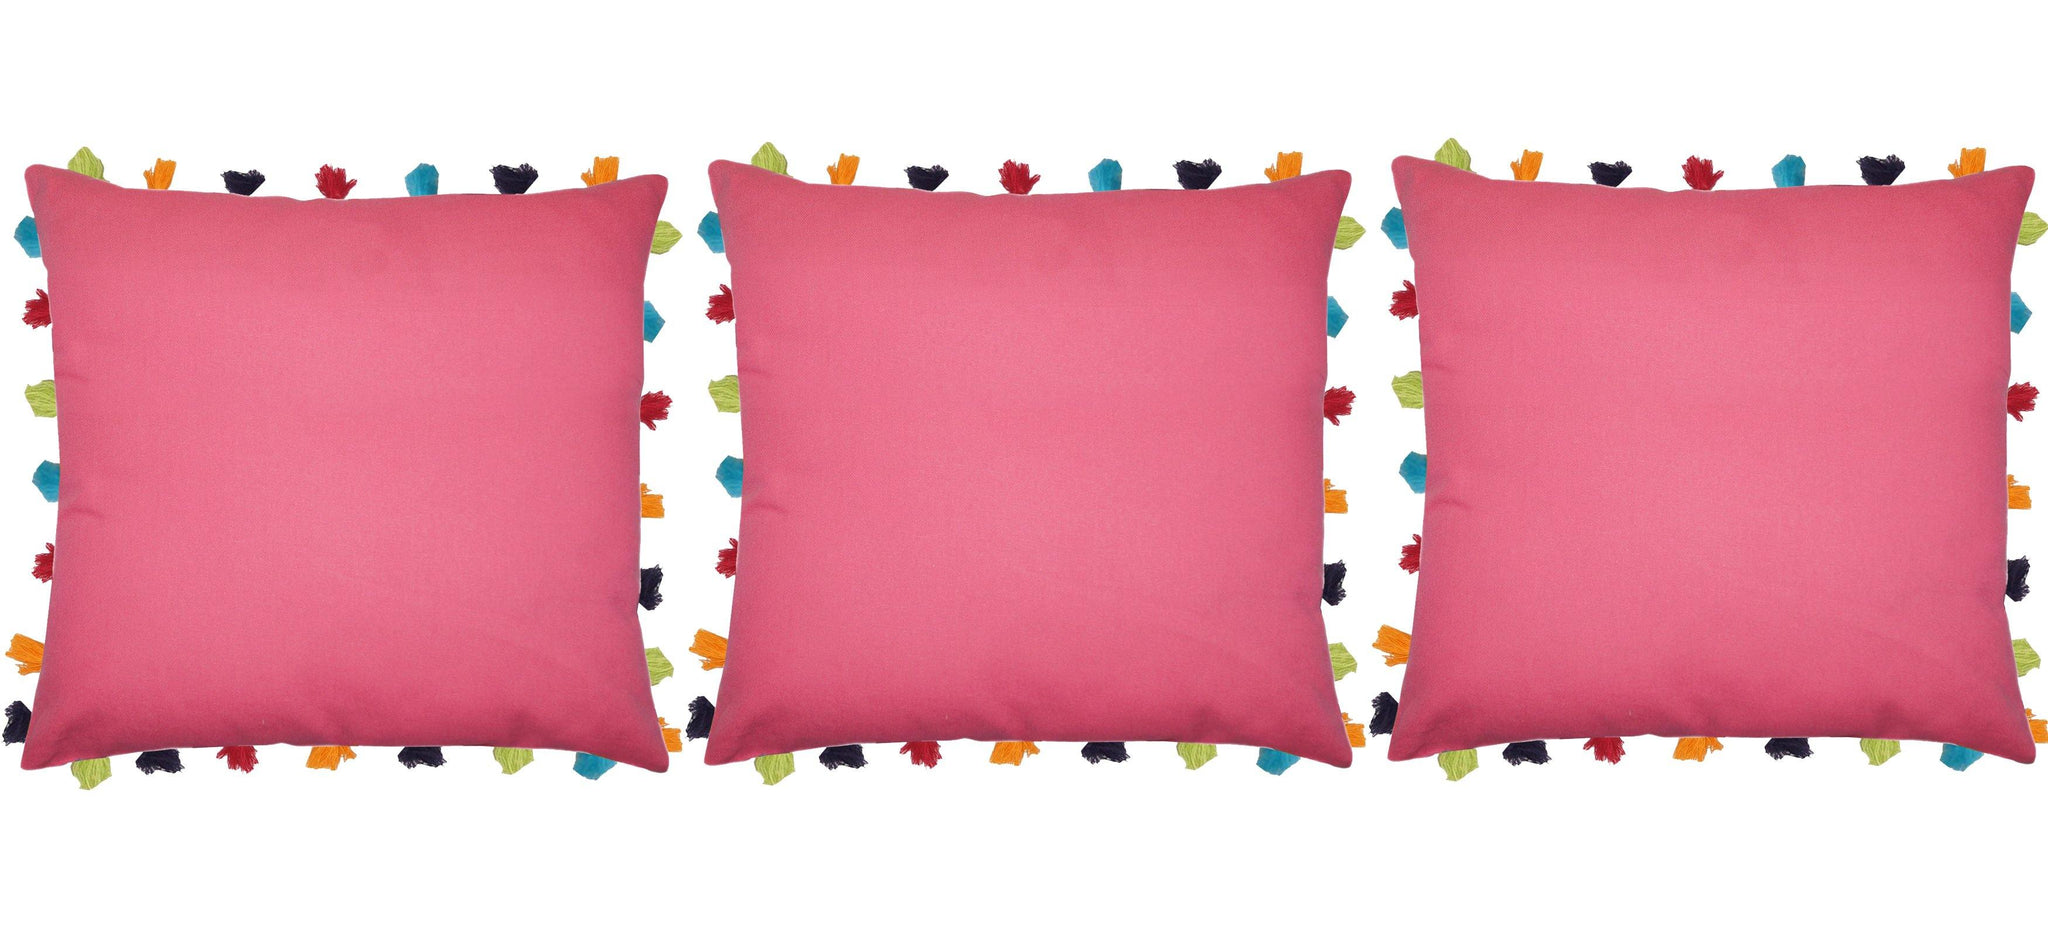 Lushomes Rasberry Cushion Cover with Colorful tassels (3 pcs, 20 x 20”) - Lushomes